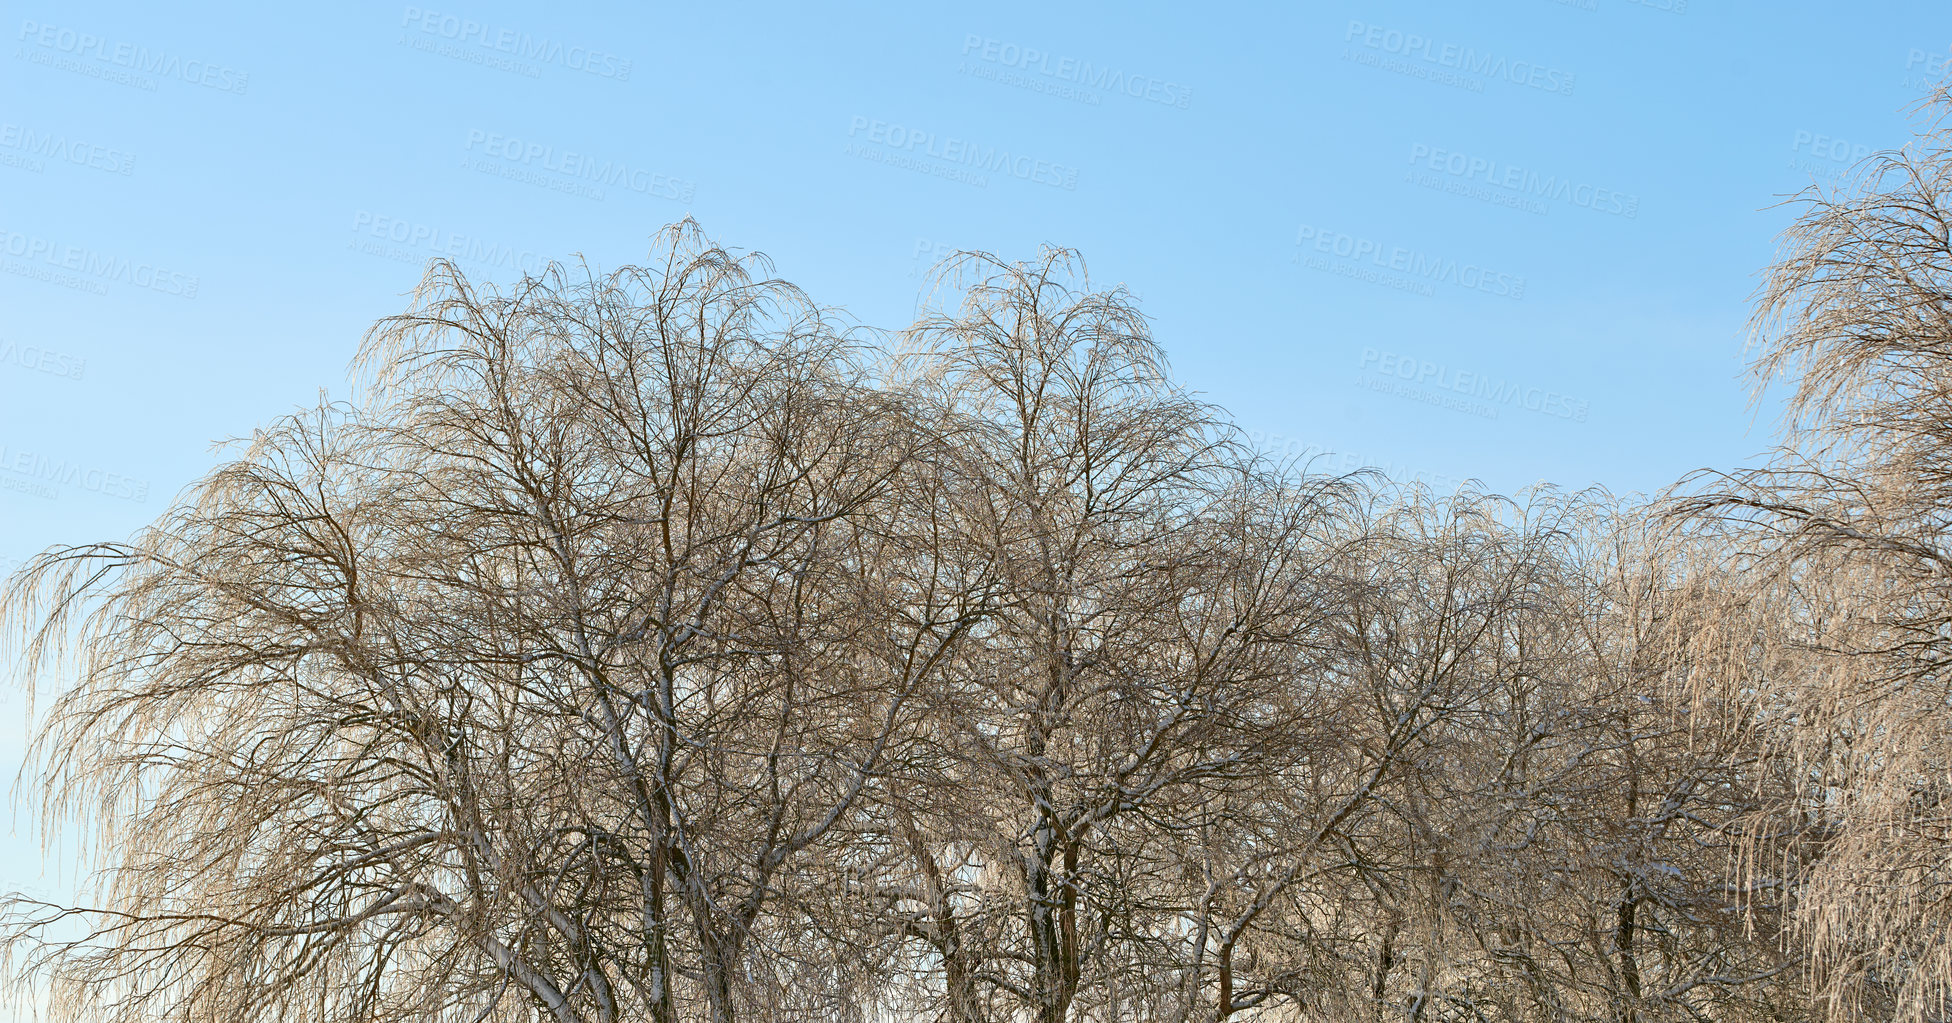 Buy stock photo Scenic view of winter beech trees with no leaves, clear blue sky and copy space in remote countryside forest in Norway. Woods with dry fall branches and twigs in a serene, secluded nature environment